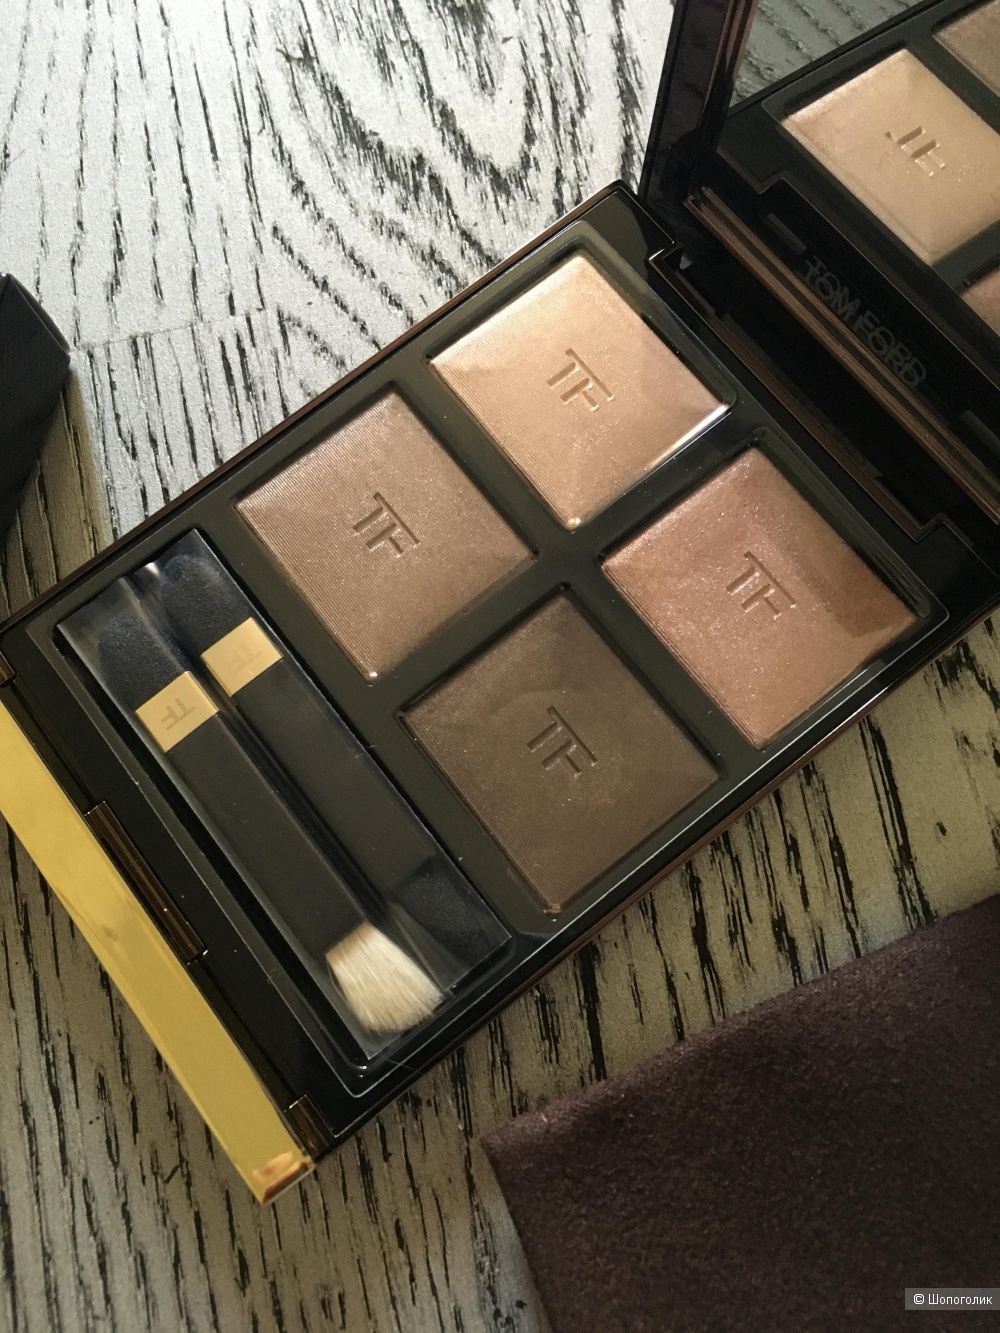 Tom Ford Nude Dip 03. One size.